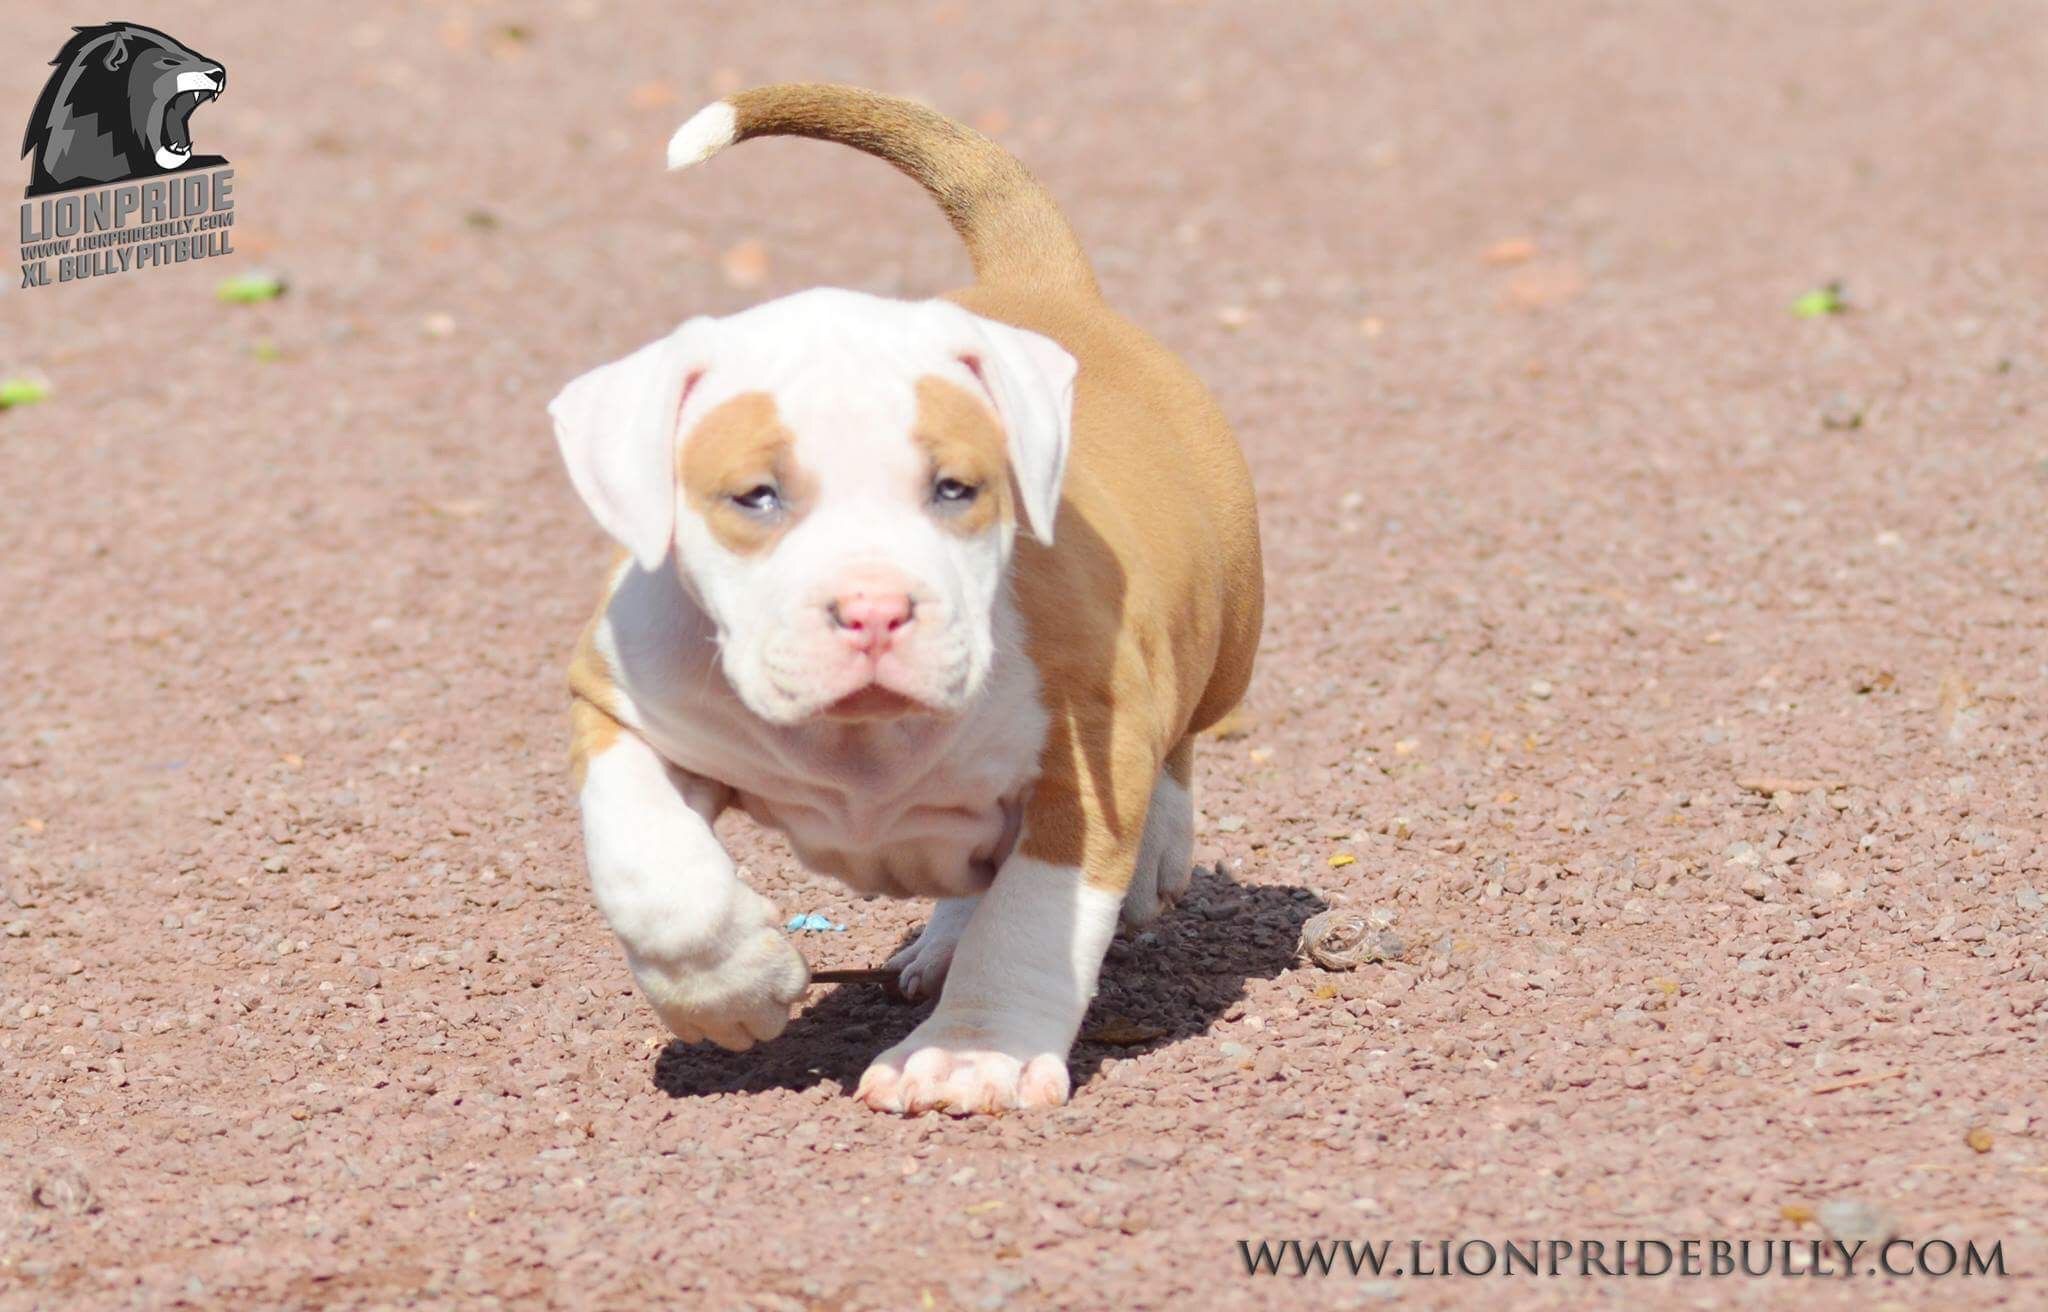 HORUS Chiot puppy puppies American bully XL XXL Bully Pitbull a vendre For sale France Belgique